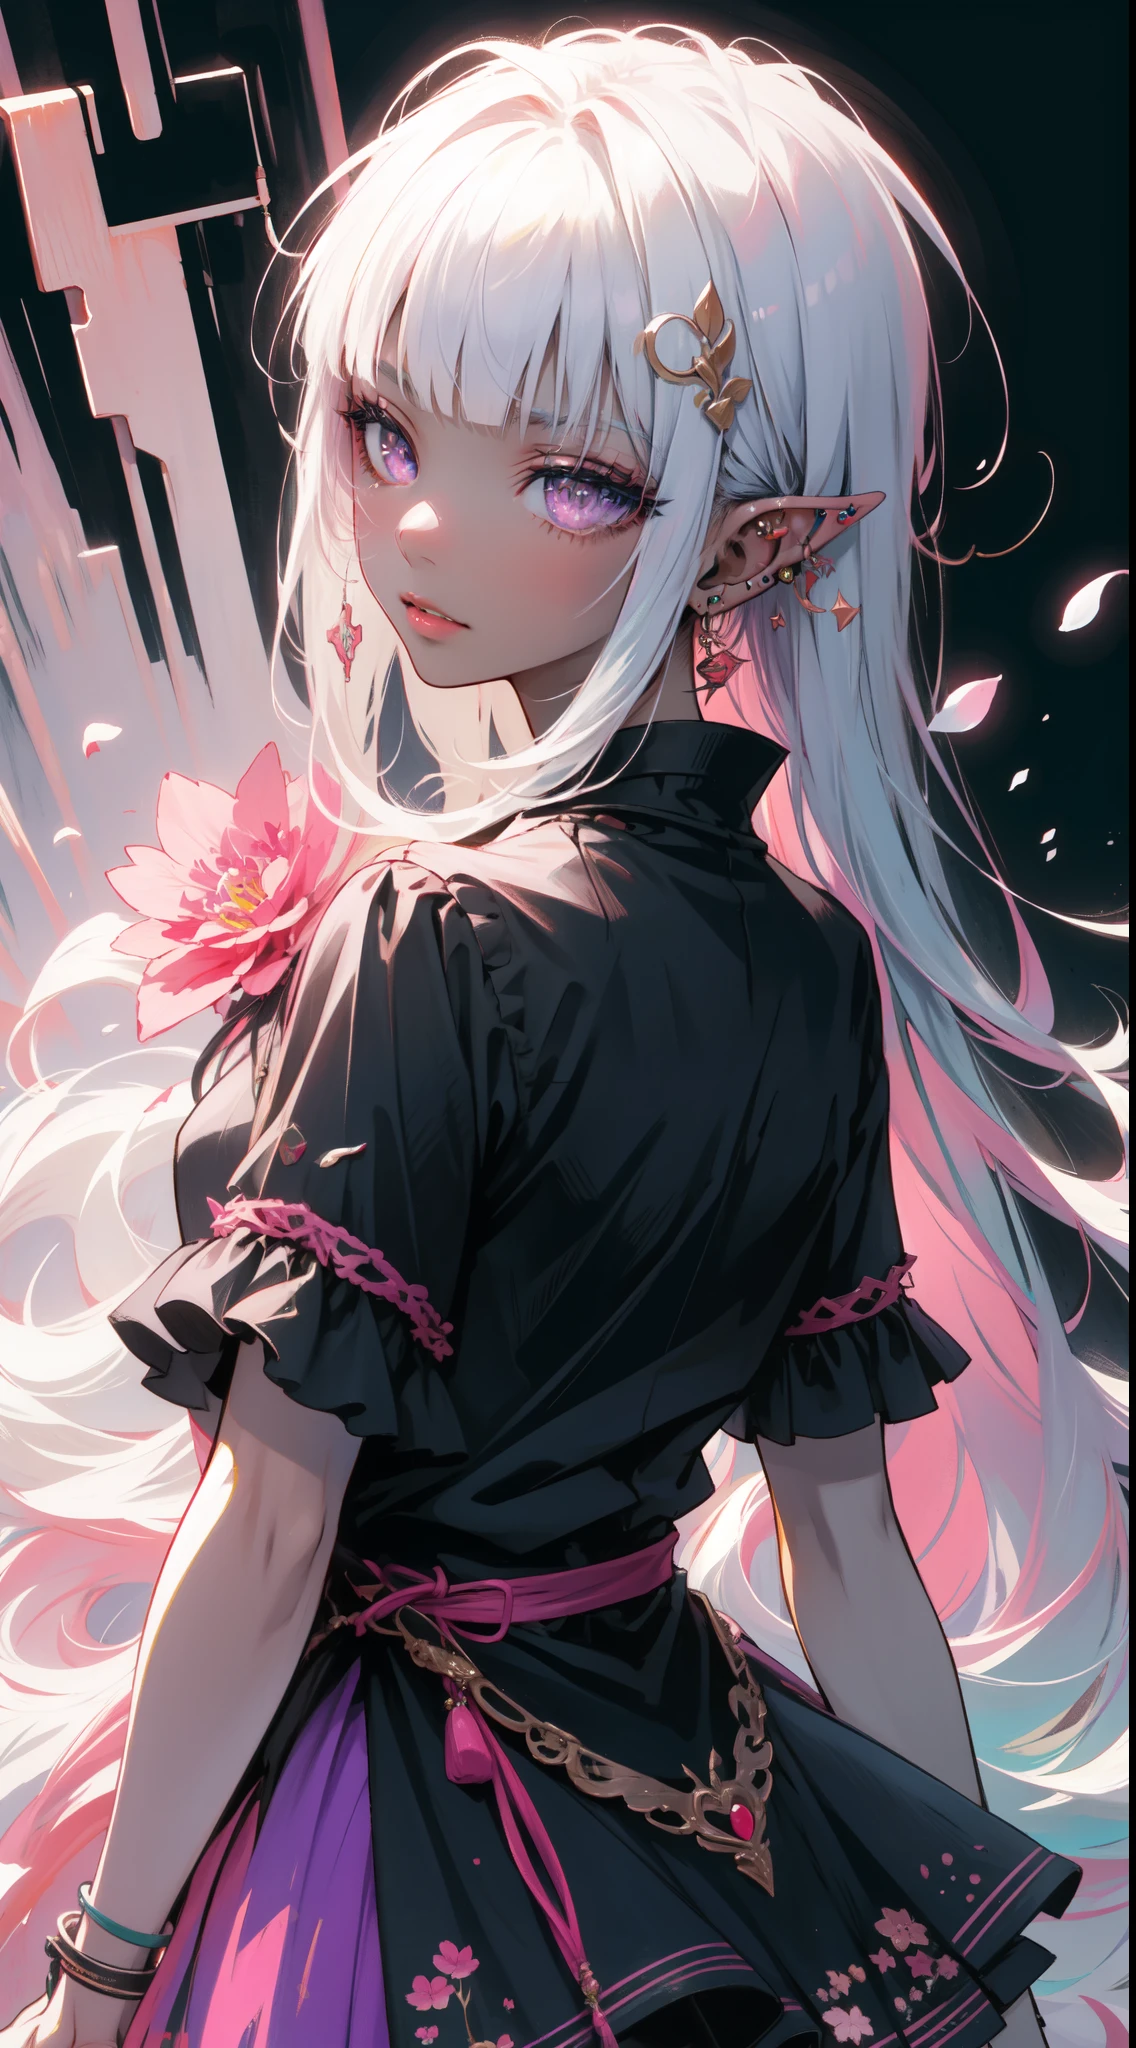 (masterpiece, top quality, best quality, official art, beautiful and aesthetic:1.2), ((dark elf)), ((1girl)), extreme detailed, (fractal art:1.3),colorful,highest detailed, portrait, from behind,  in the style art by Artgerm, by wadim kashin, by Kawacy, by Yoshitaka Amano, BREAK, insanely detailed face, details eye, Blunt bangs, white hair, (hair between eye), eyelashes, violet eyes, eyeshadow, pink eyeshadow, (dark skin:1.1), BREAK, corsages, jirai kei, (jirai kei fashion:1.1), Frills, Skirts, Various accessories, (ear piercing), punky style, Japanese subculture, fashion, Stockings, colorful, (Dark circles:1.2),